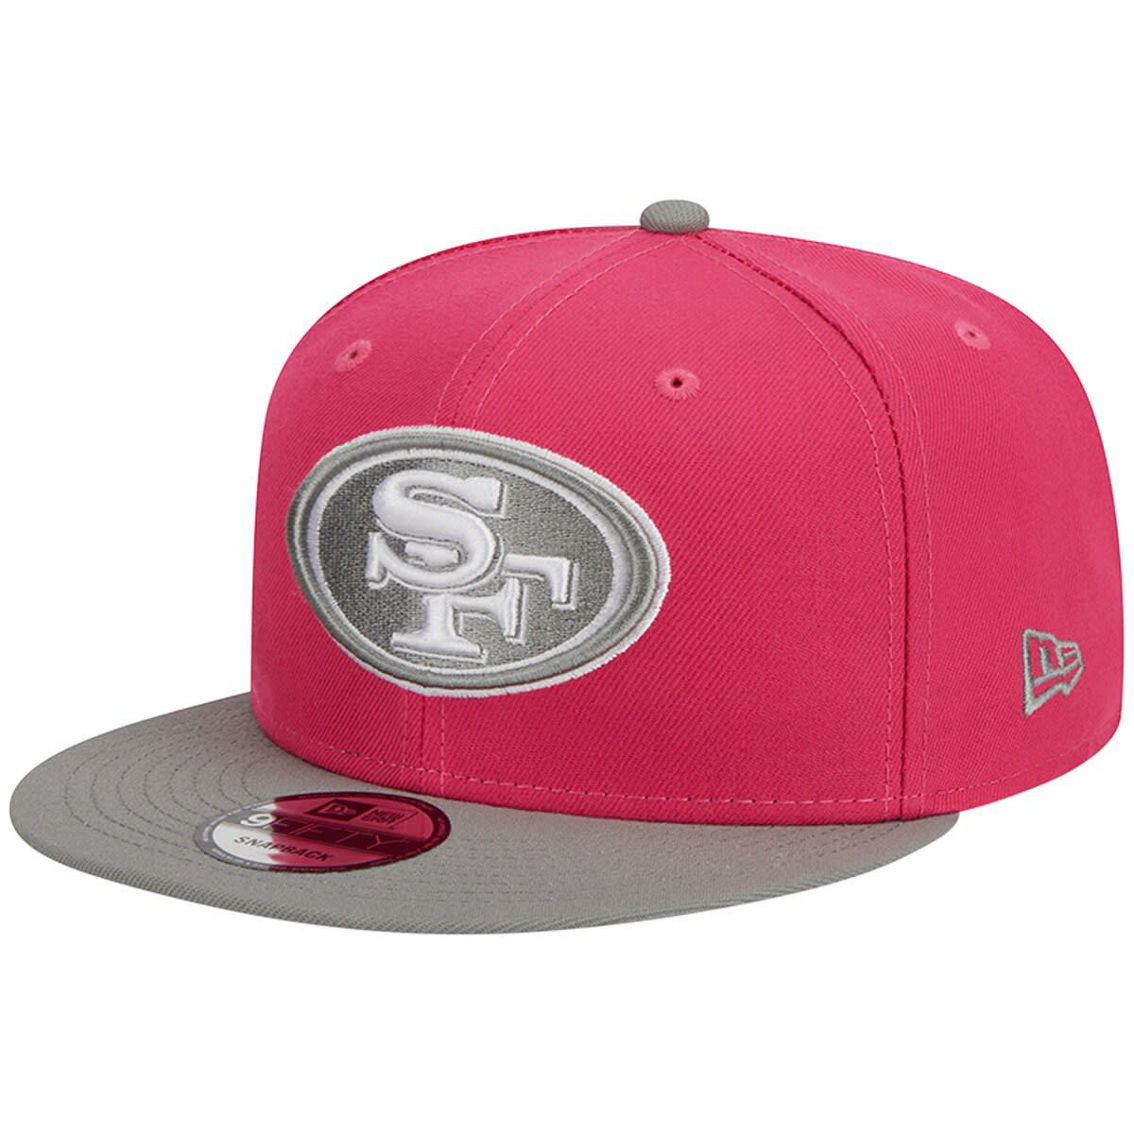 New Era Men's Pink/Gray San Francisco 49ers 2-Tone Color Pack 9FIFTY Snapback Hat - Image 2 of 4